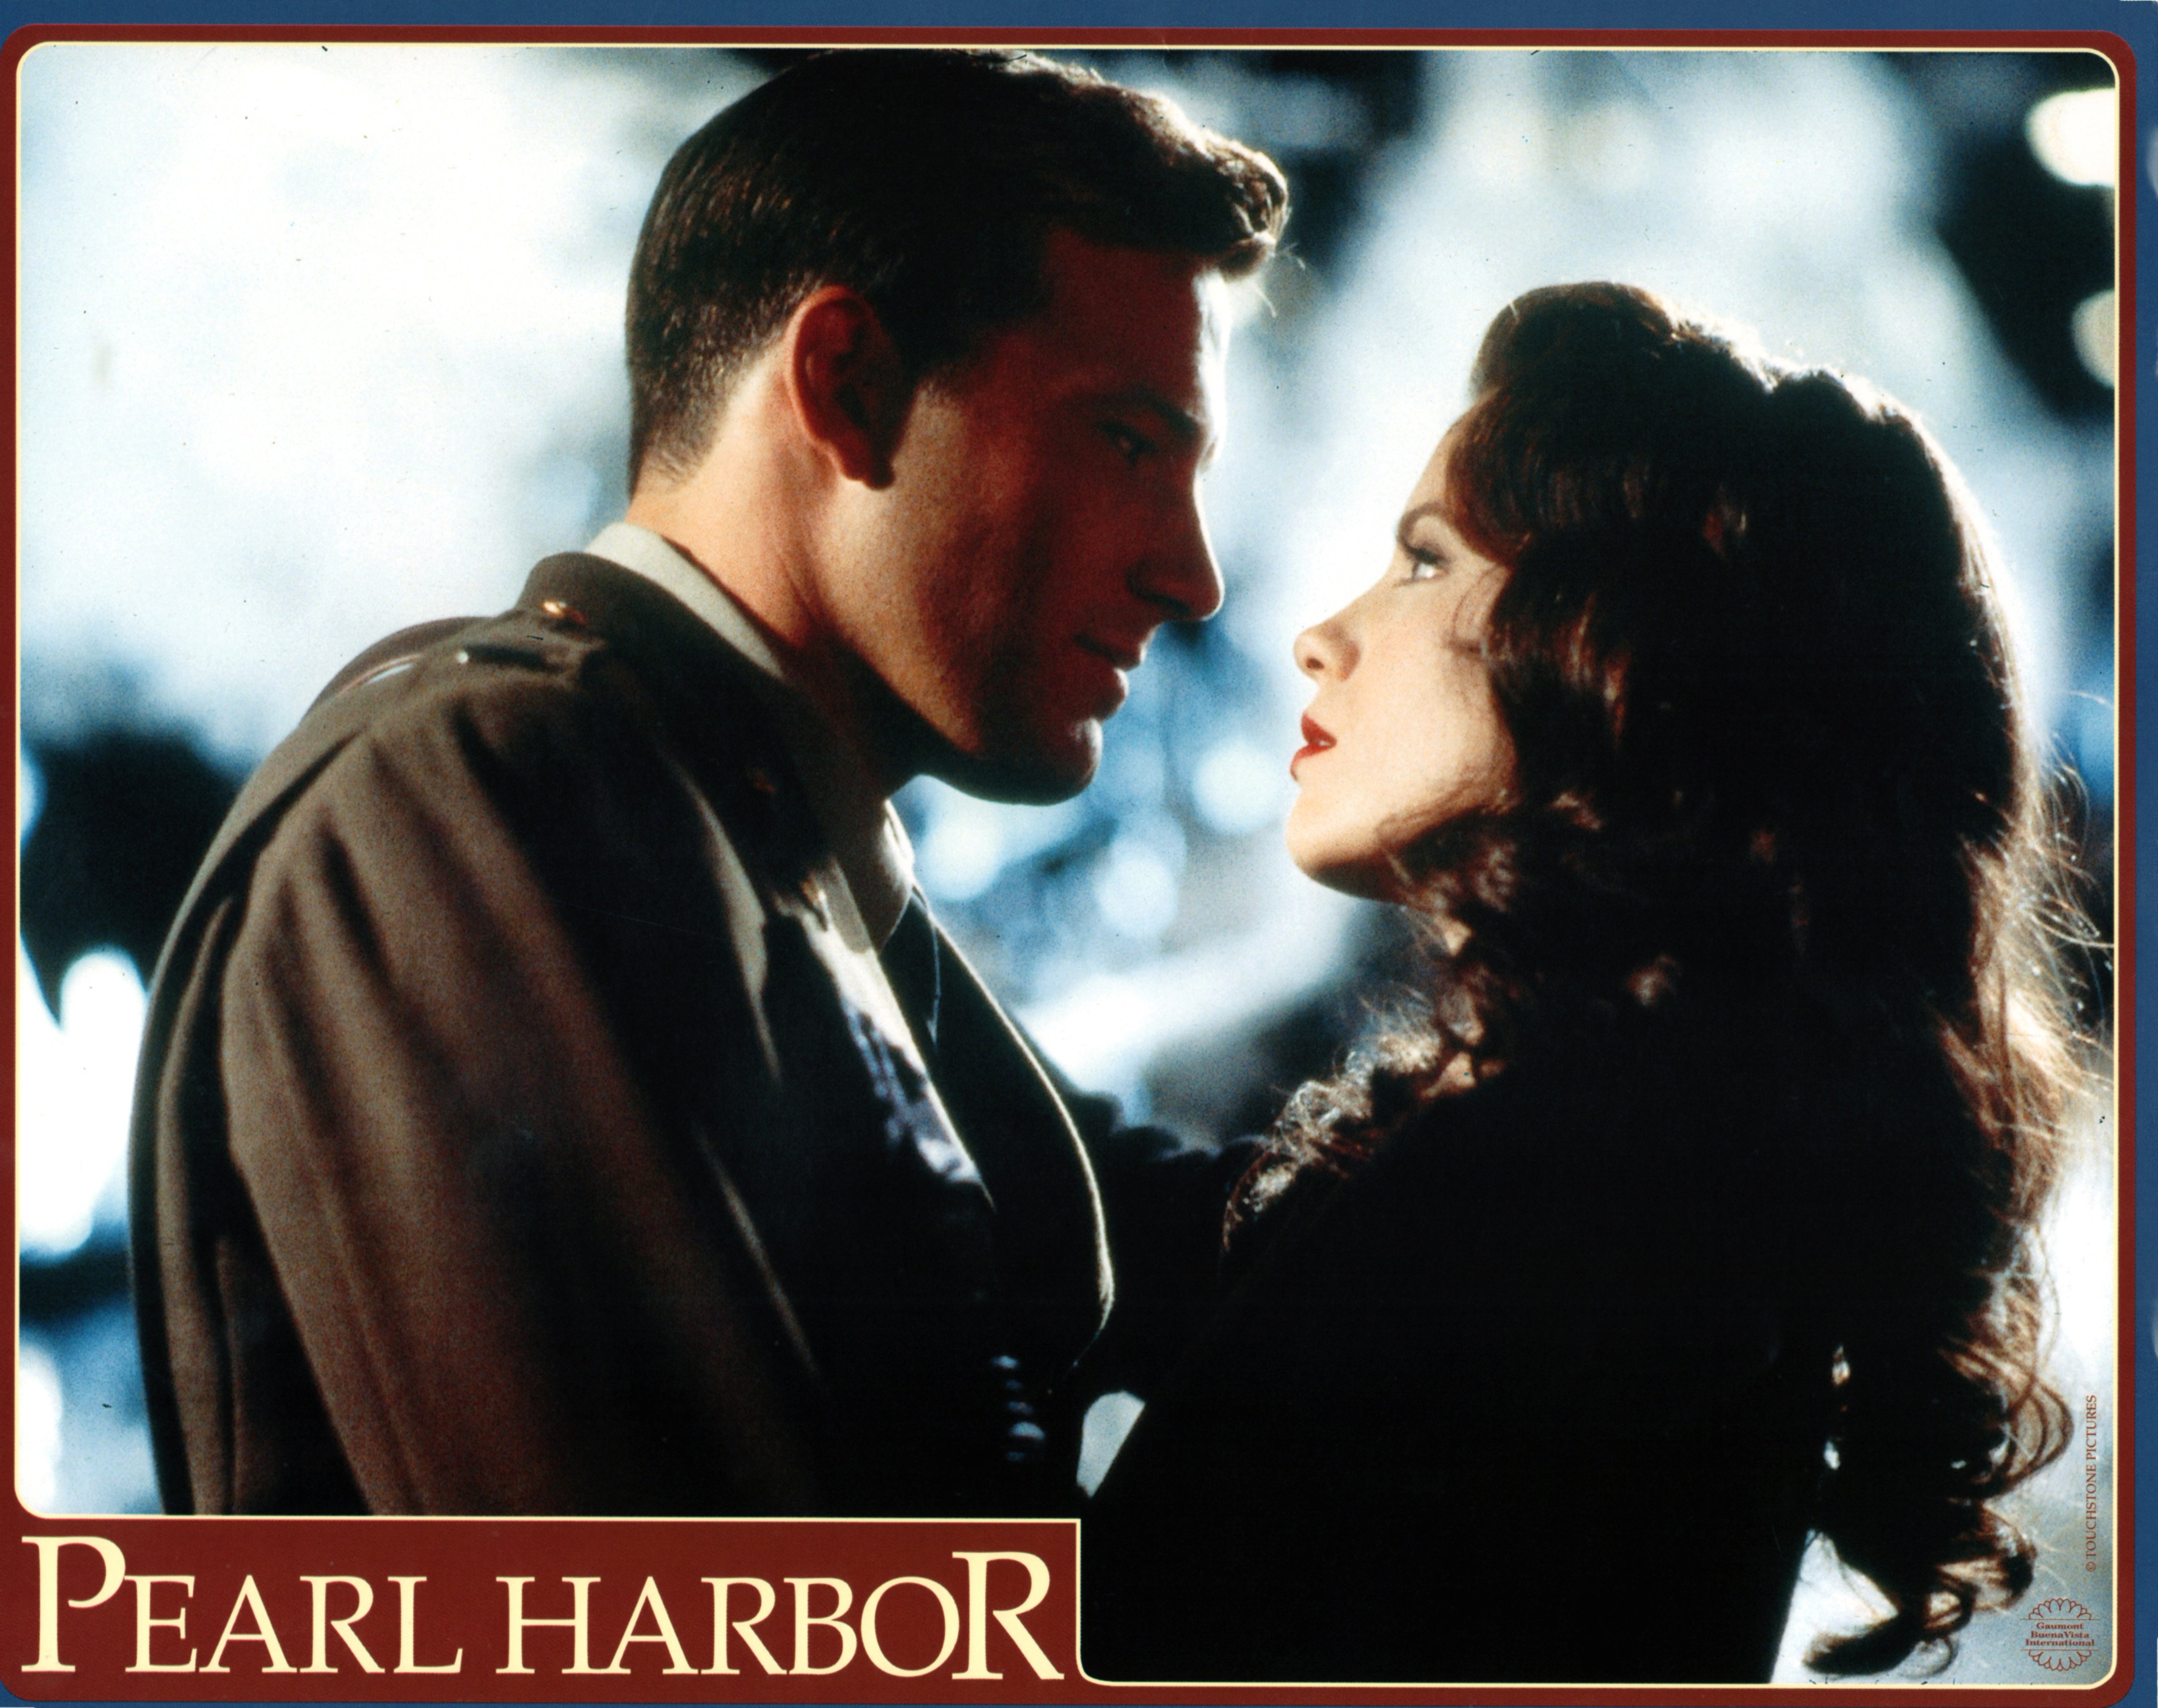 Ben Affleck and Kate Beckinsale in Pearl Harbor 